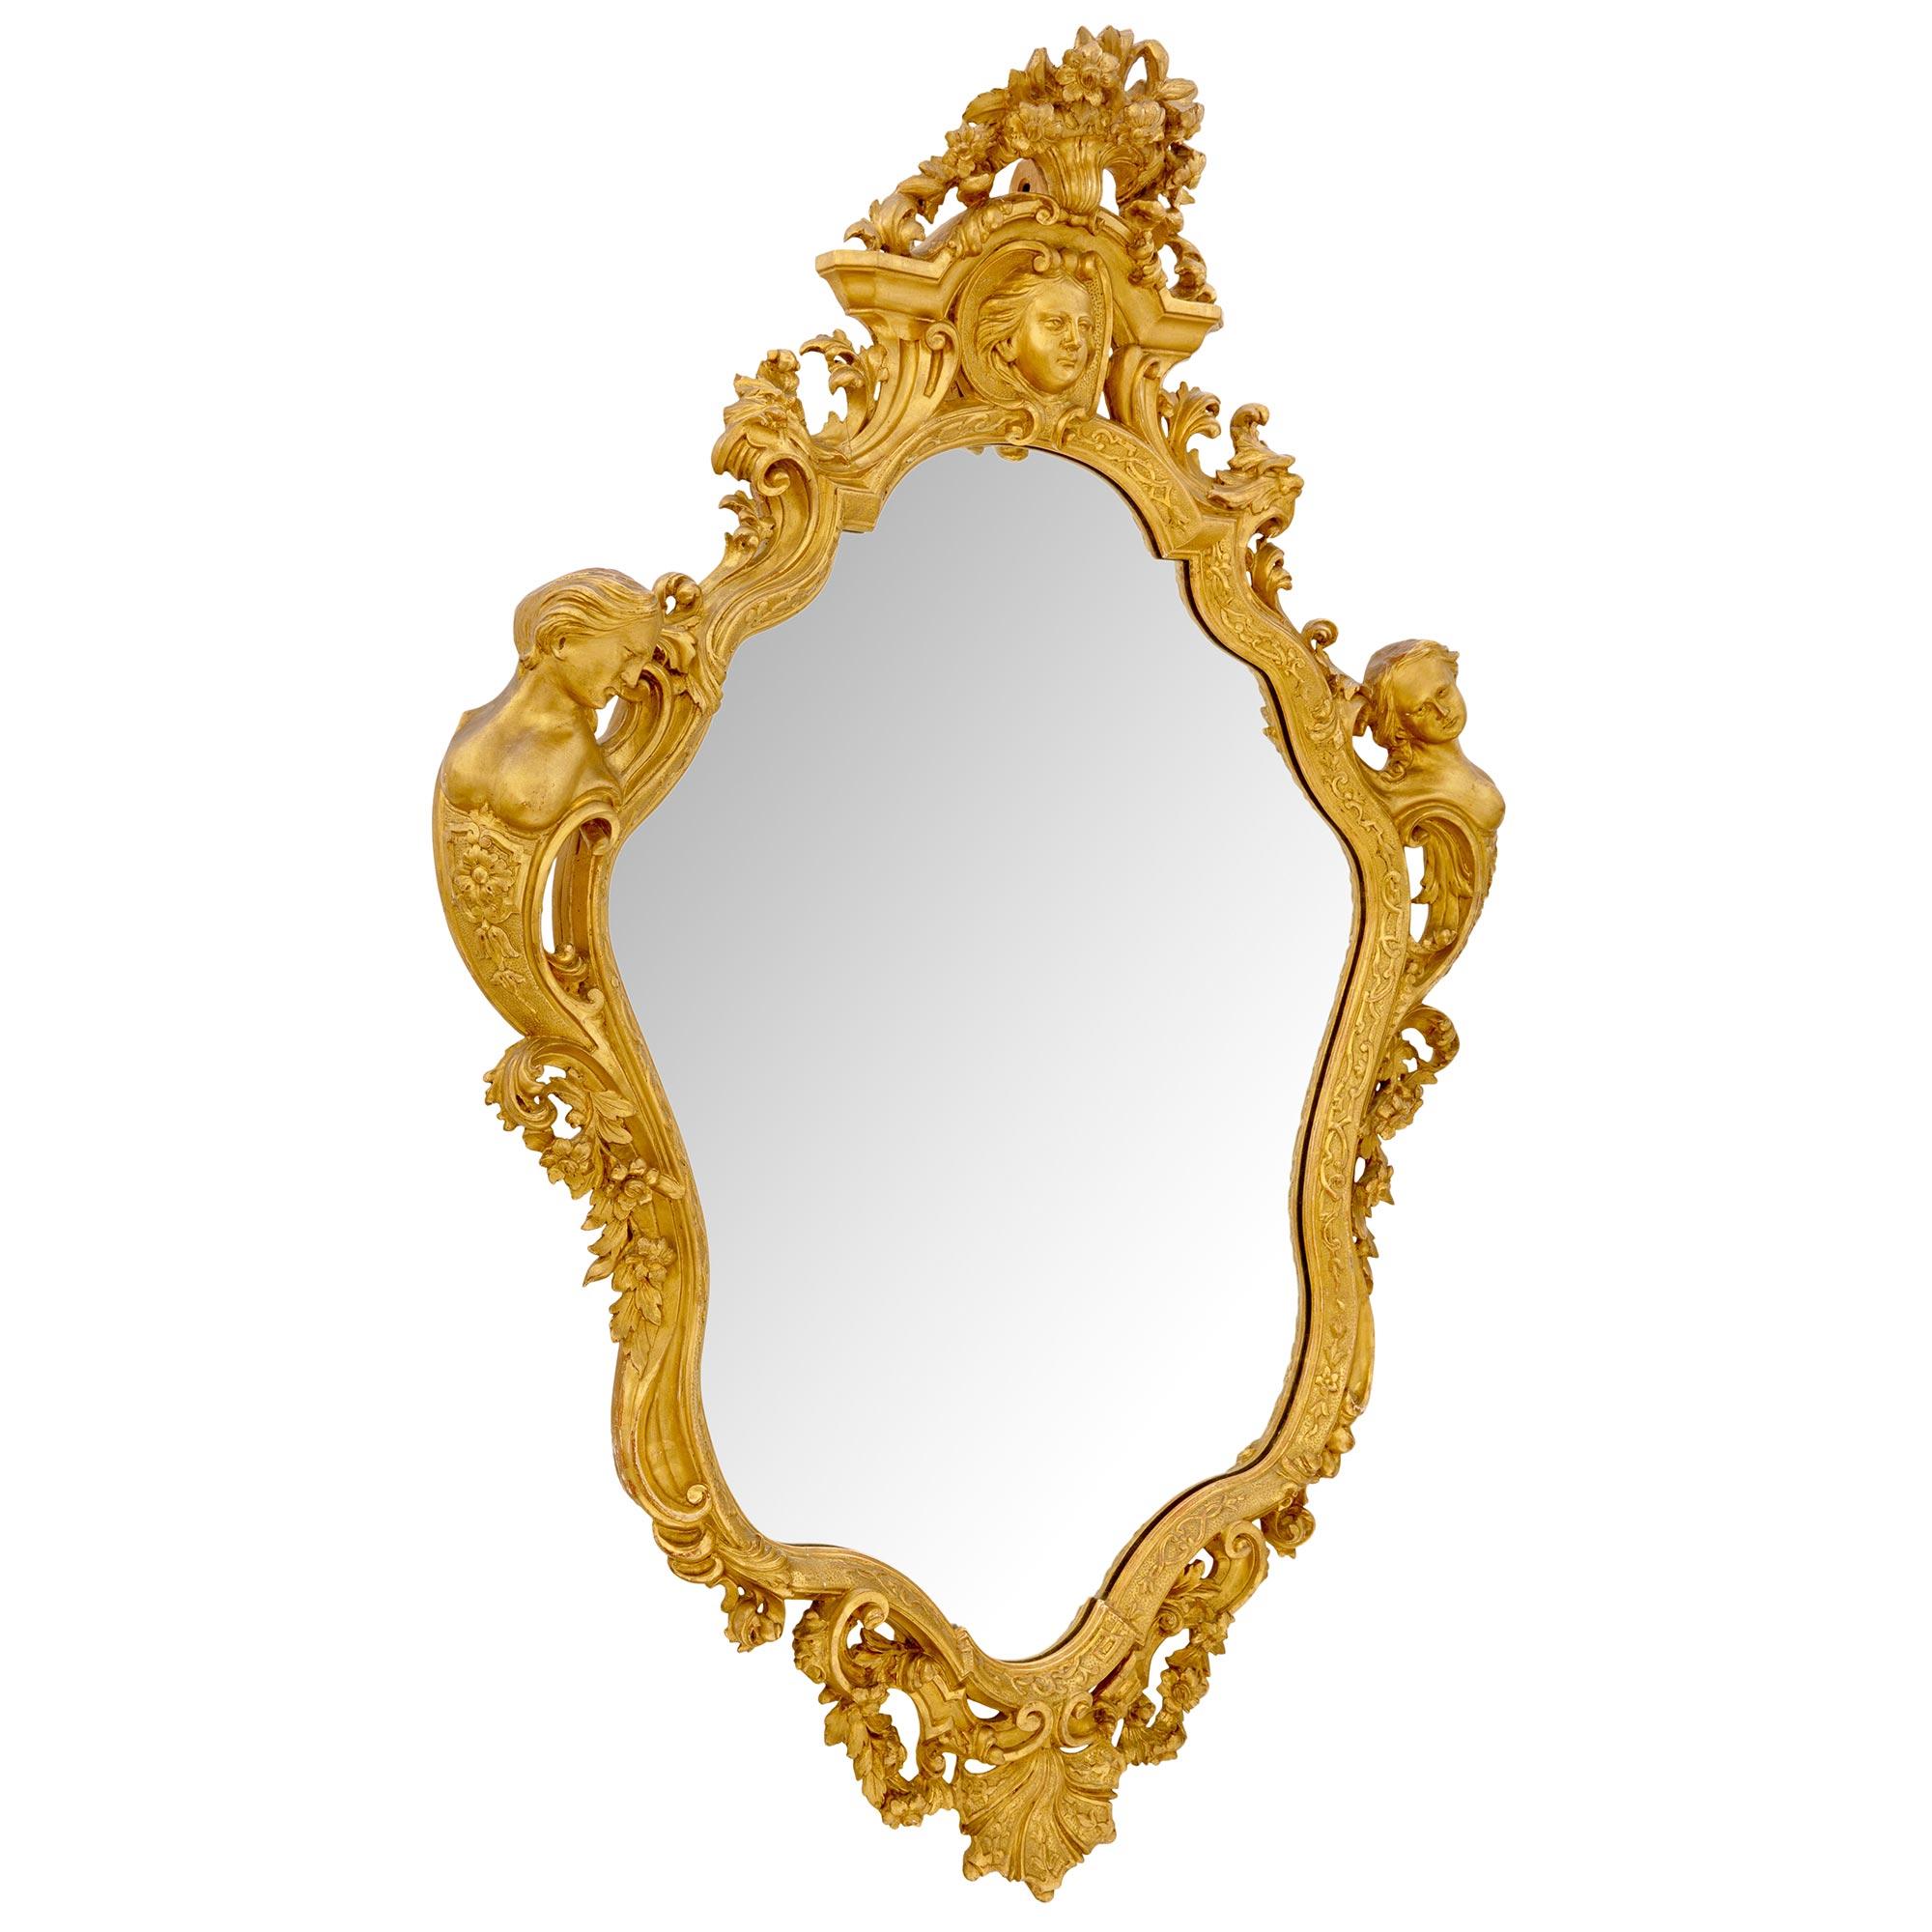 A magnificent French 19th century Louis XV st. giltwood mirror. The original mirror plate is framed within a most decorative scallop shaped border with lovely etched floral designs. At the base is an impressive seashell reserve centered by charming